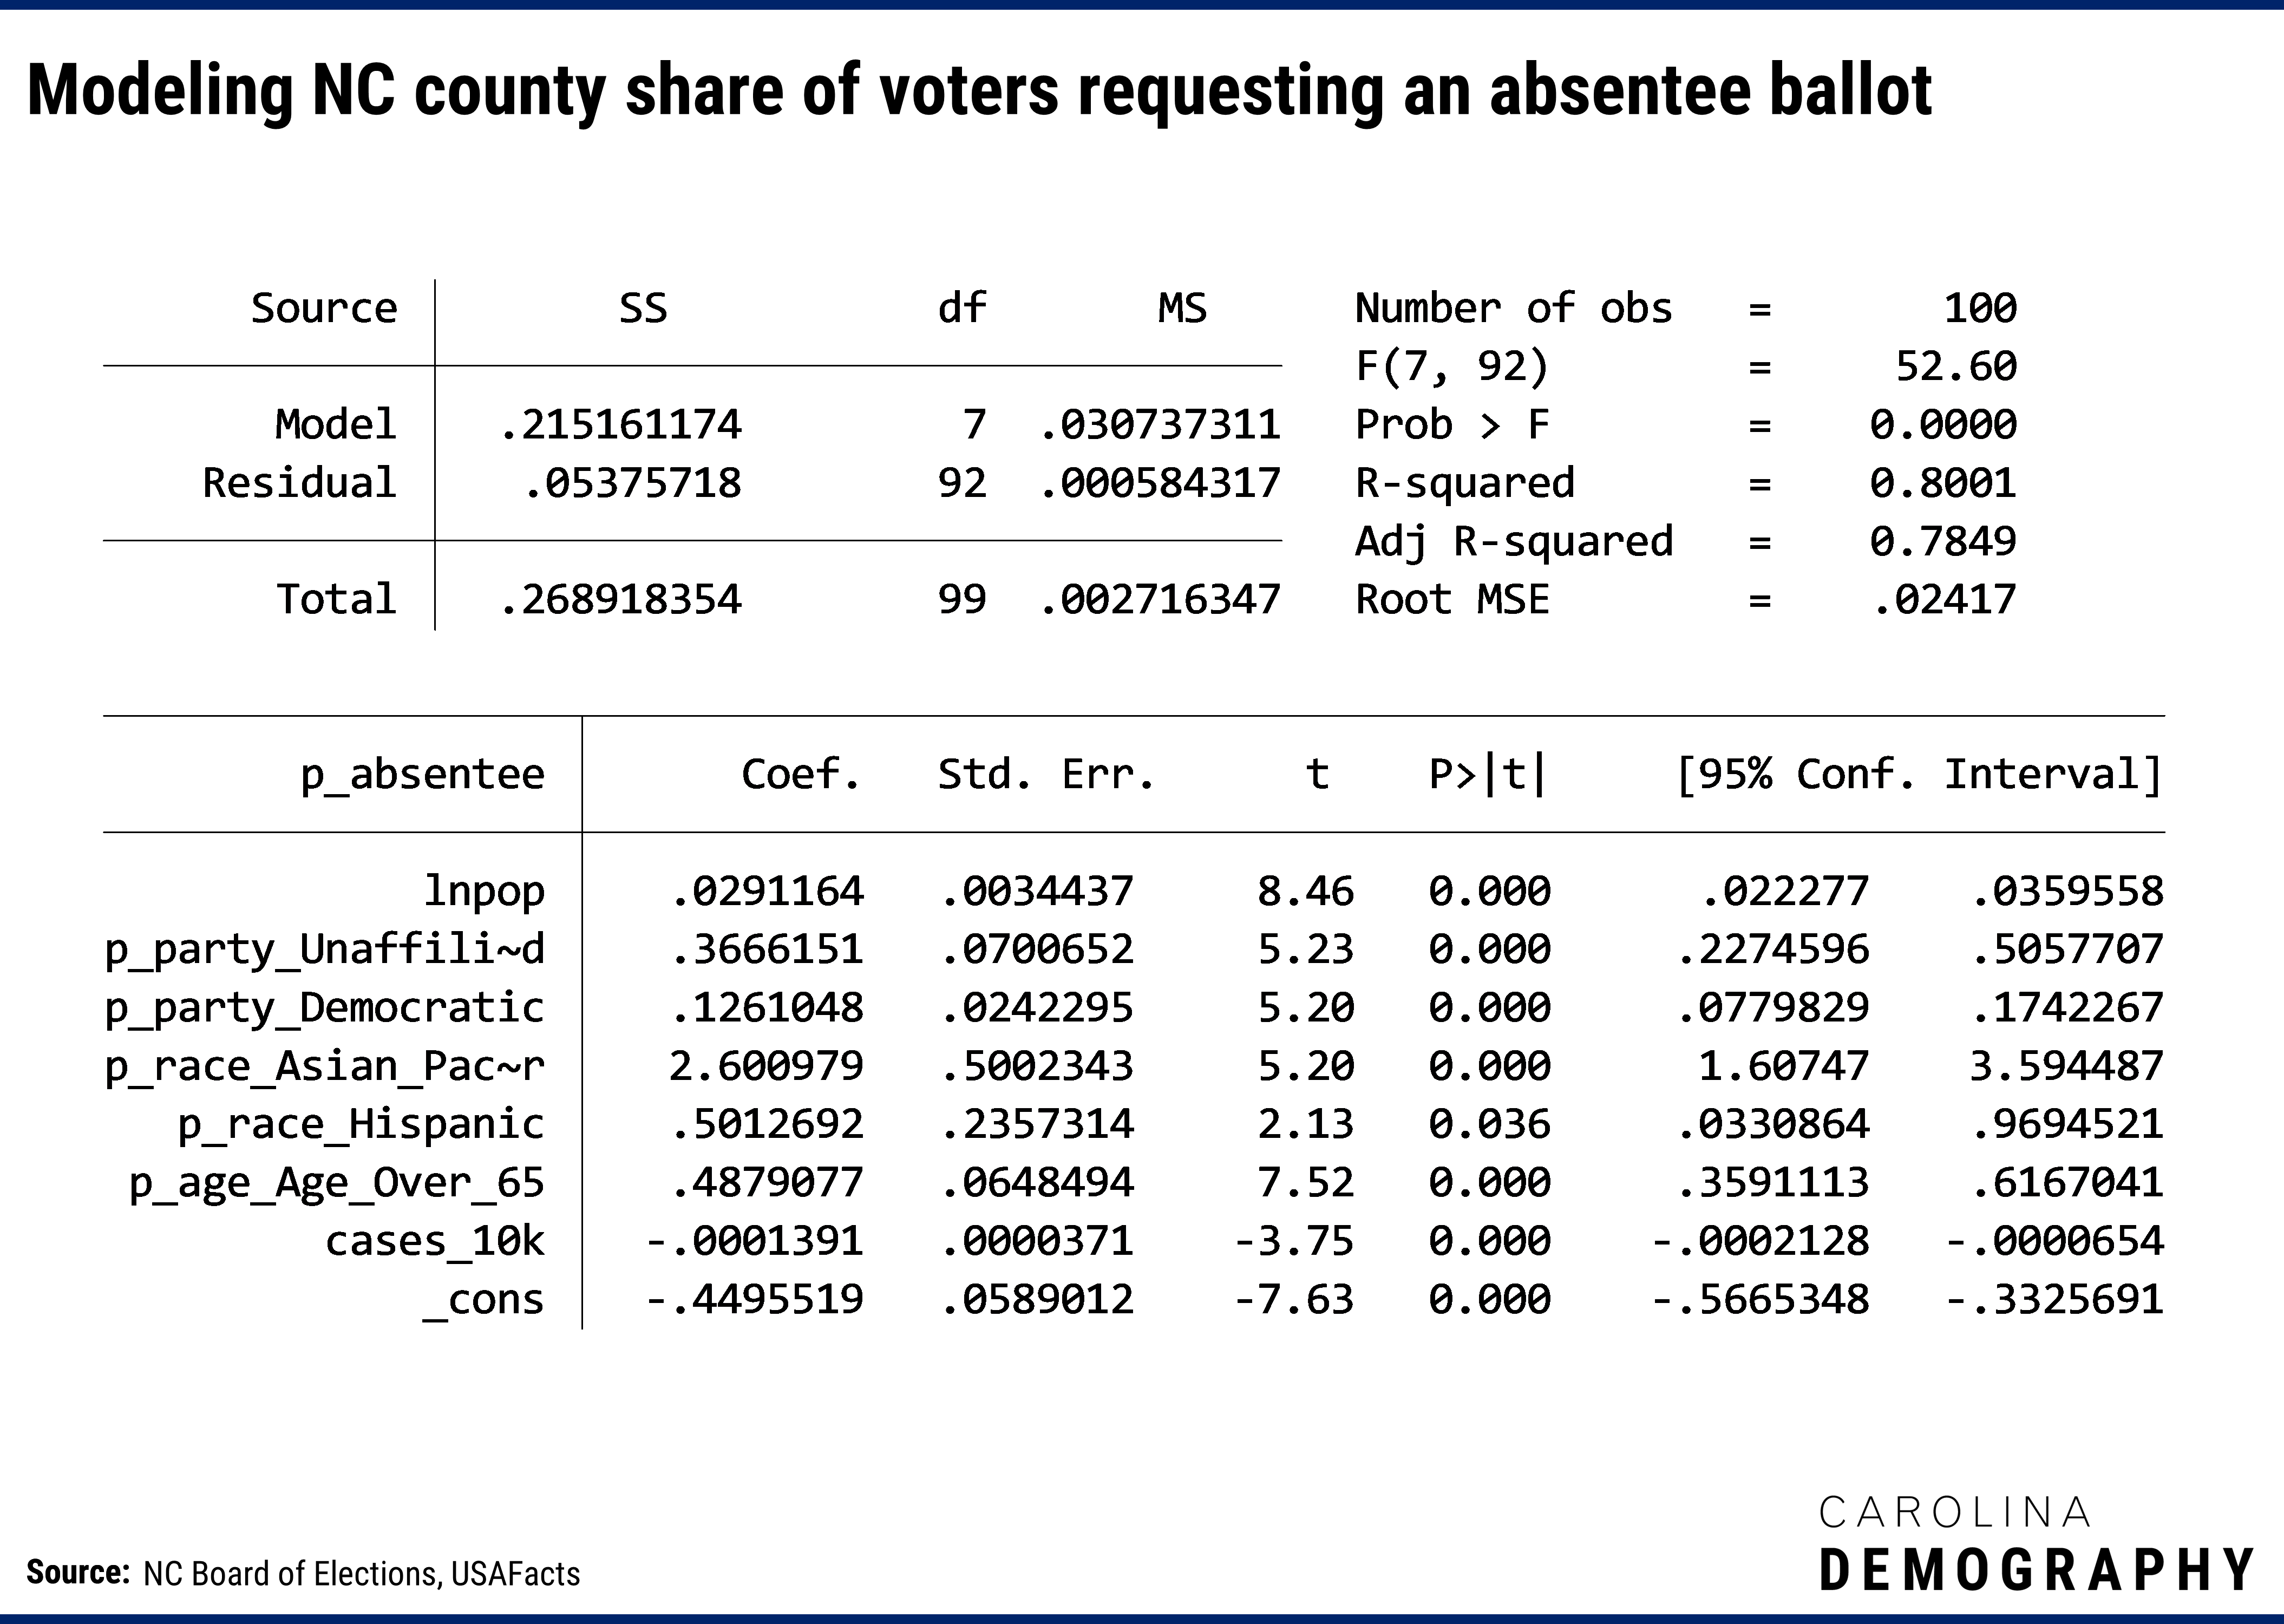 Code snip showing the calculations for modeling NC county share of voters requesting an absentee ballot